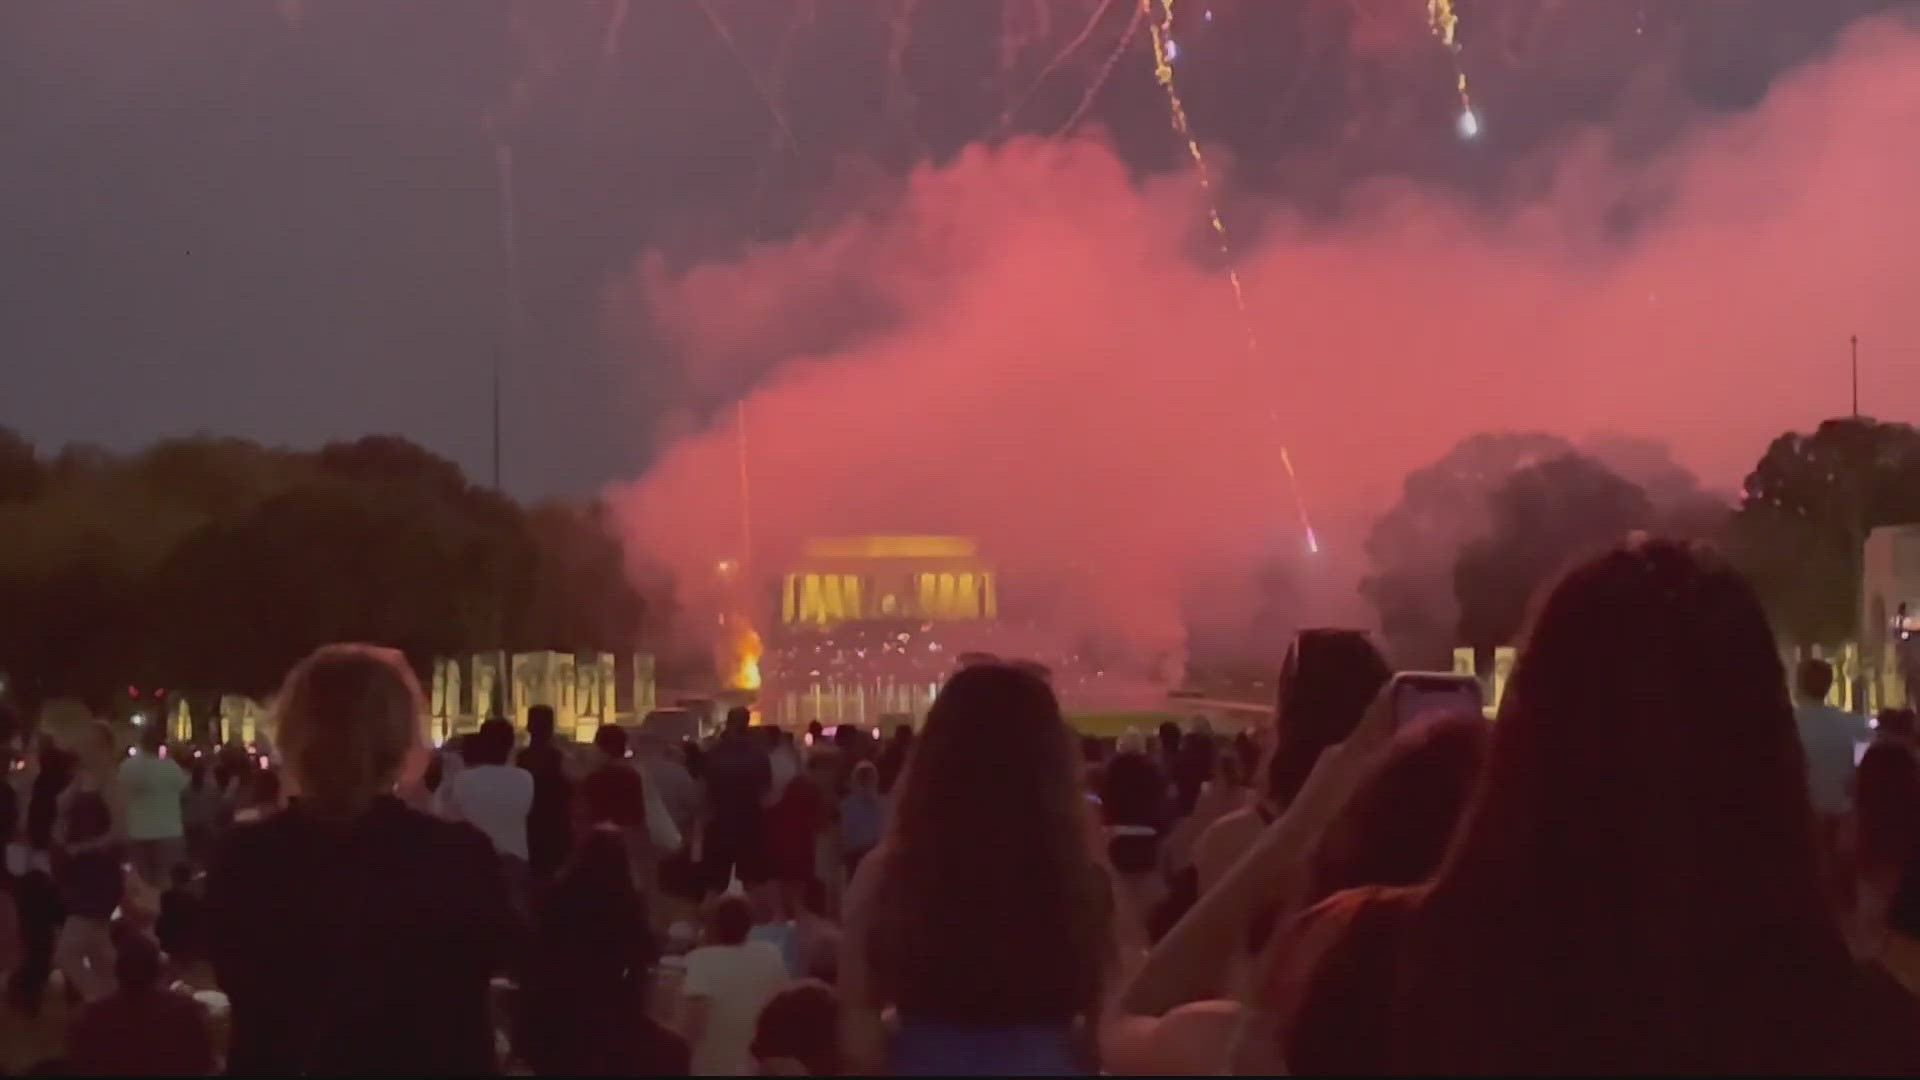 All parts of the Washington D.C. metro area restrict fireworks, but some places have tighter laws than others, and some ban fireworks outright